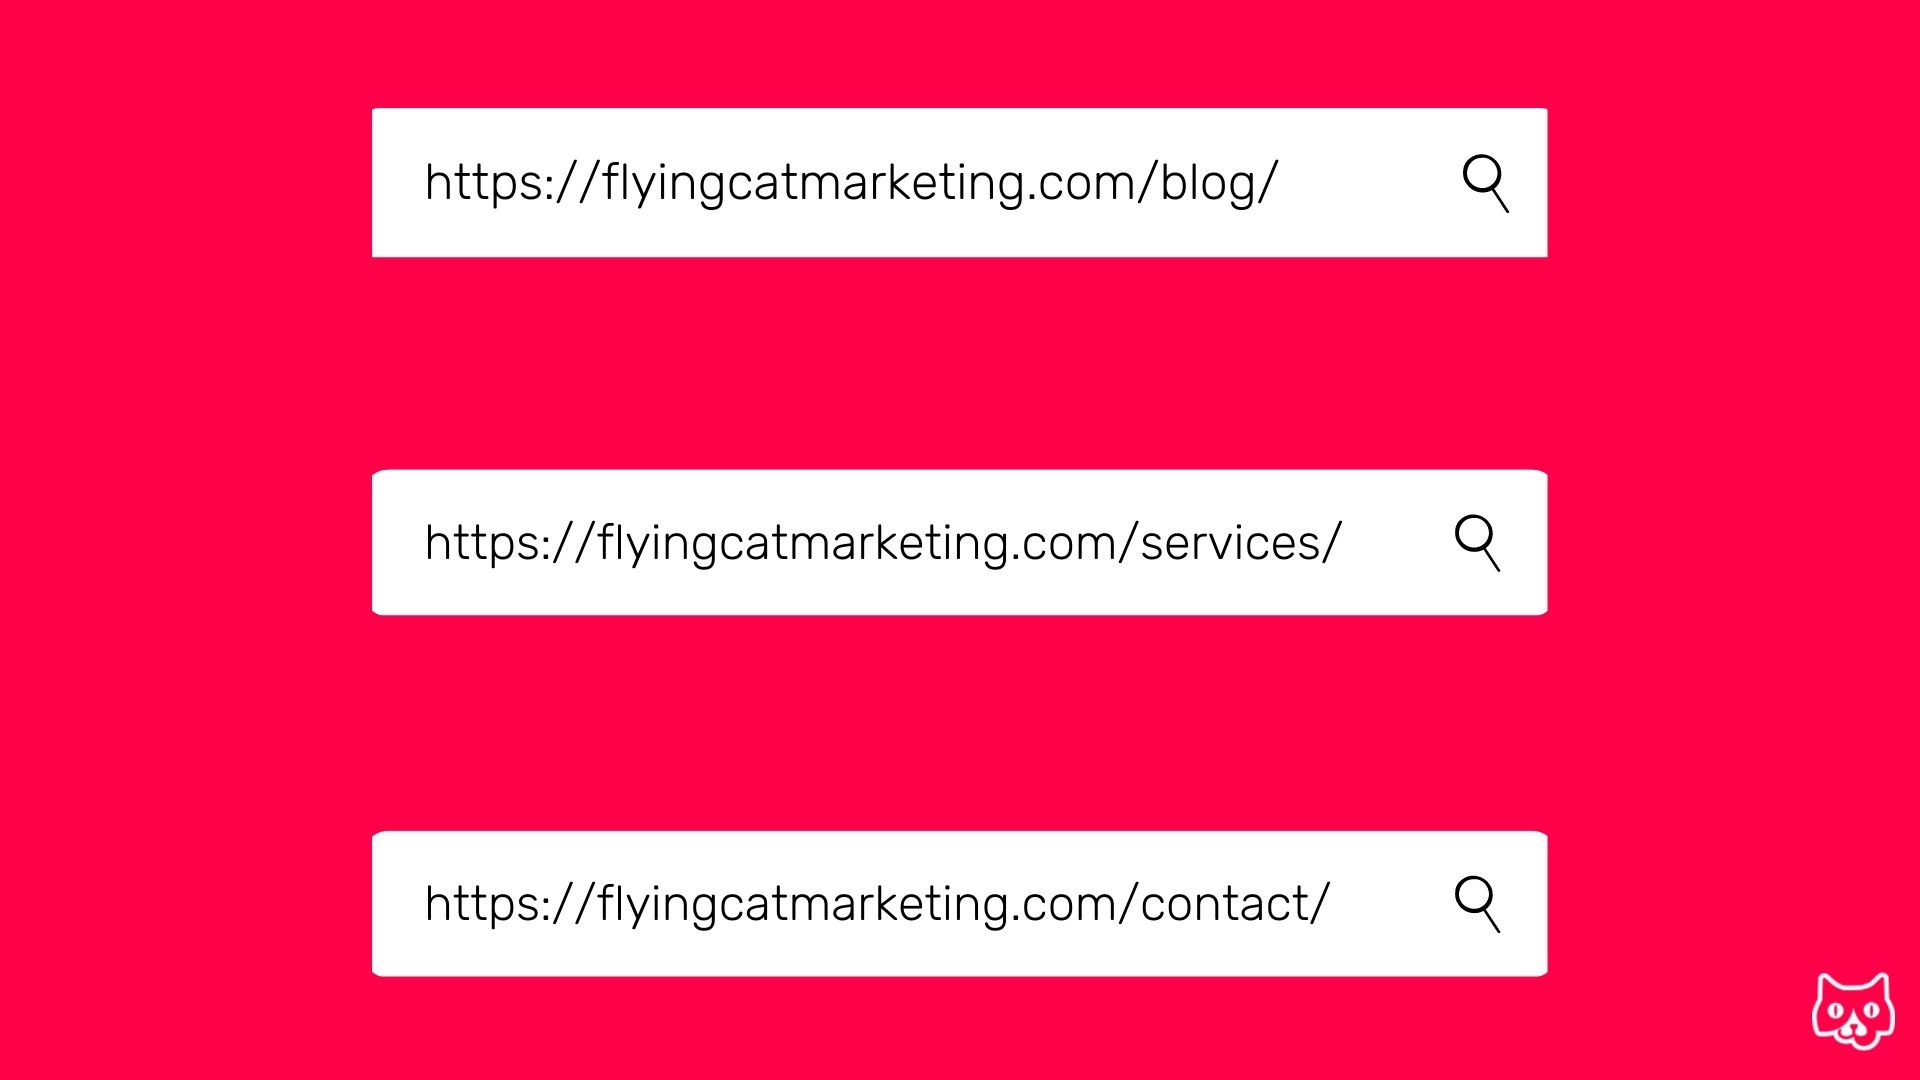 This image is the Flying cat marketing red background with 3 white search bars. Each has the link to a different page on the FCM website. 